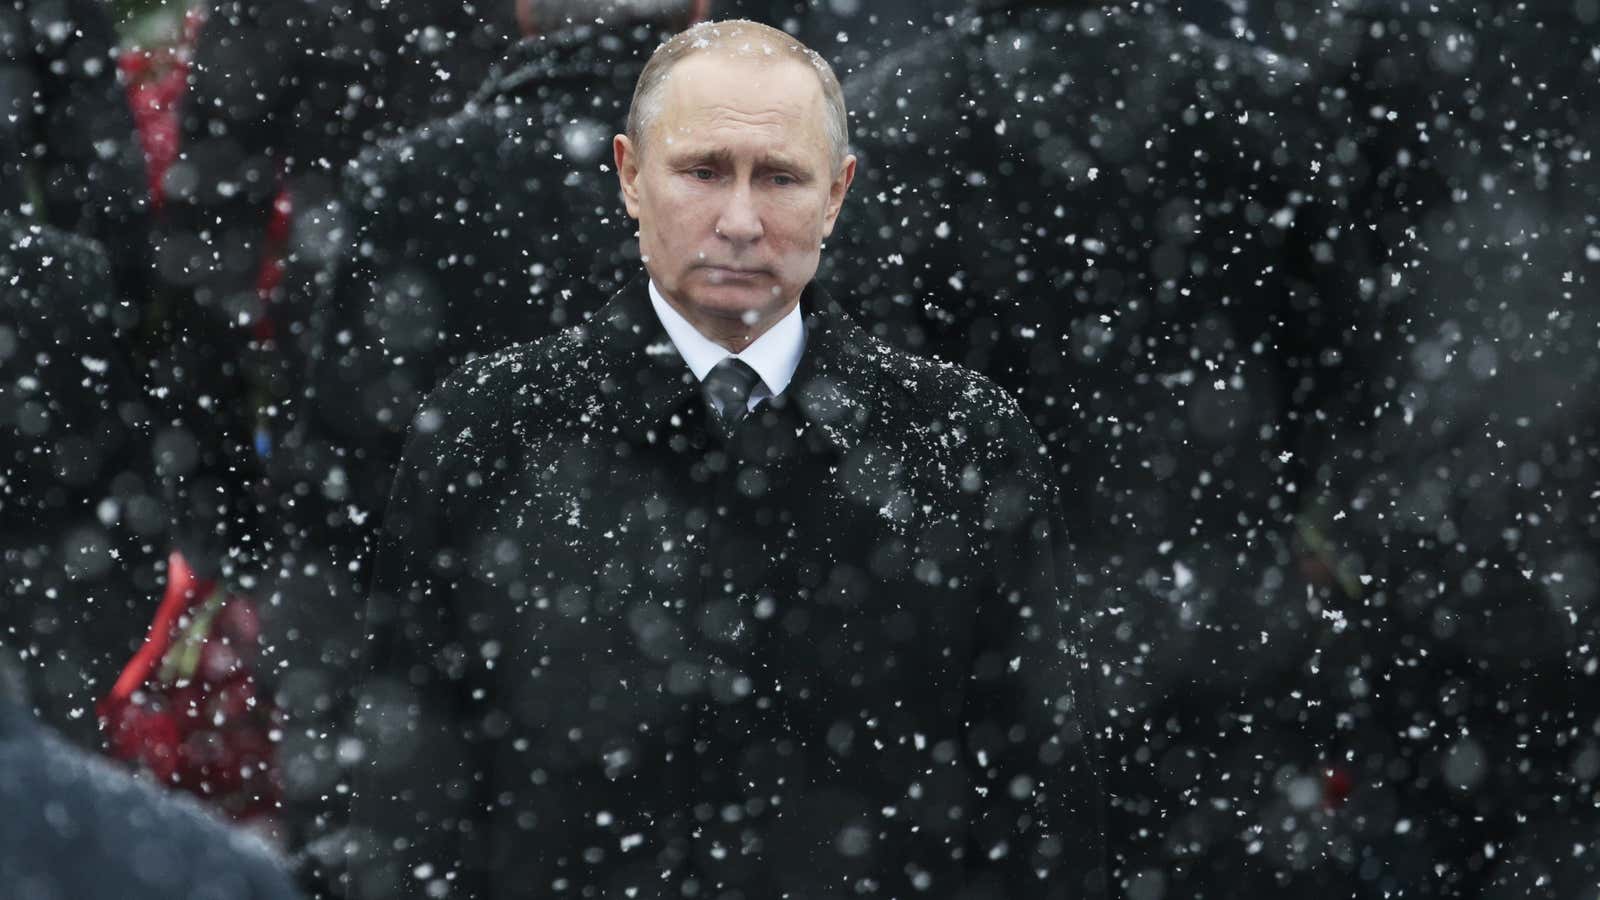 A clearer view of Russia’s president.